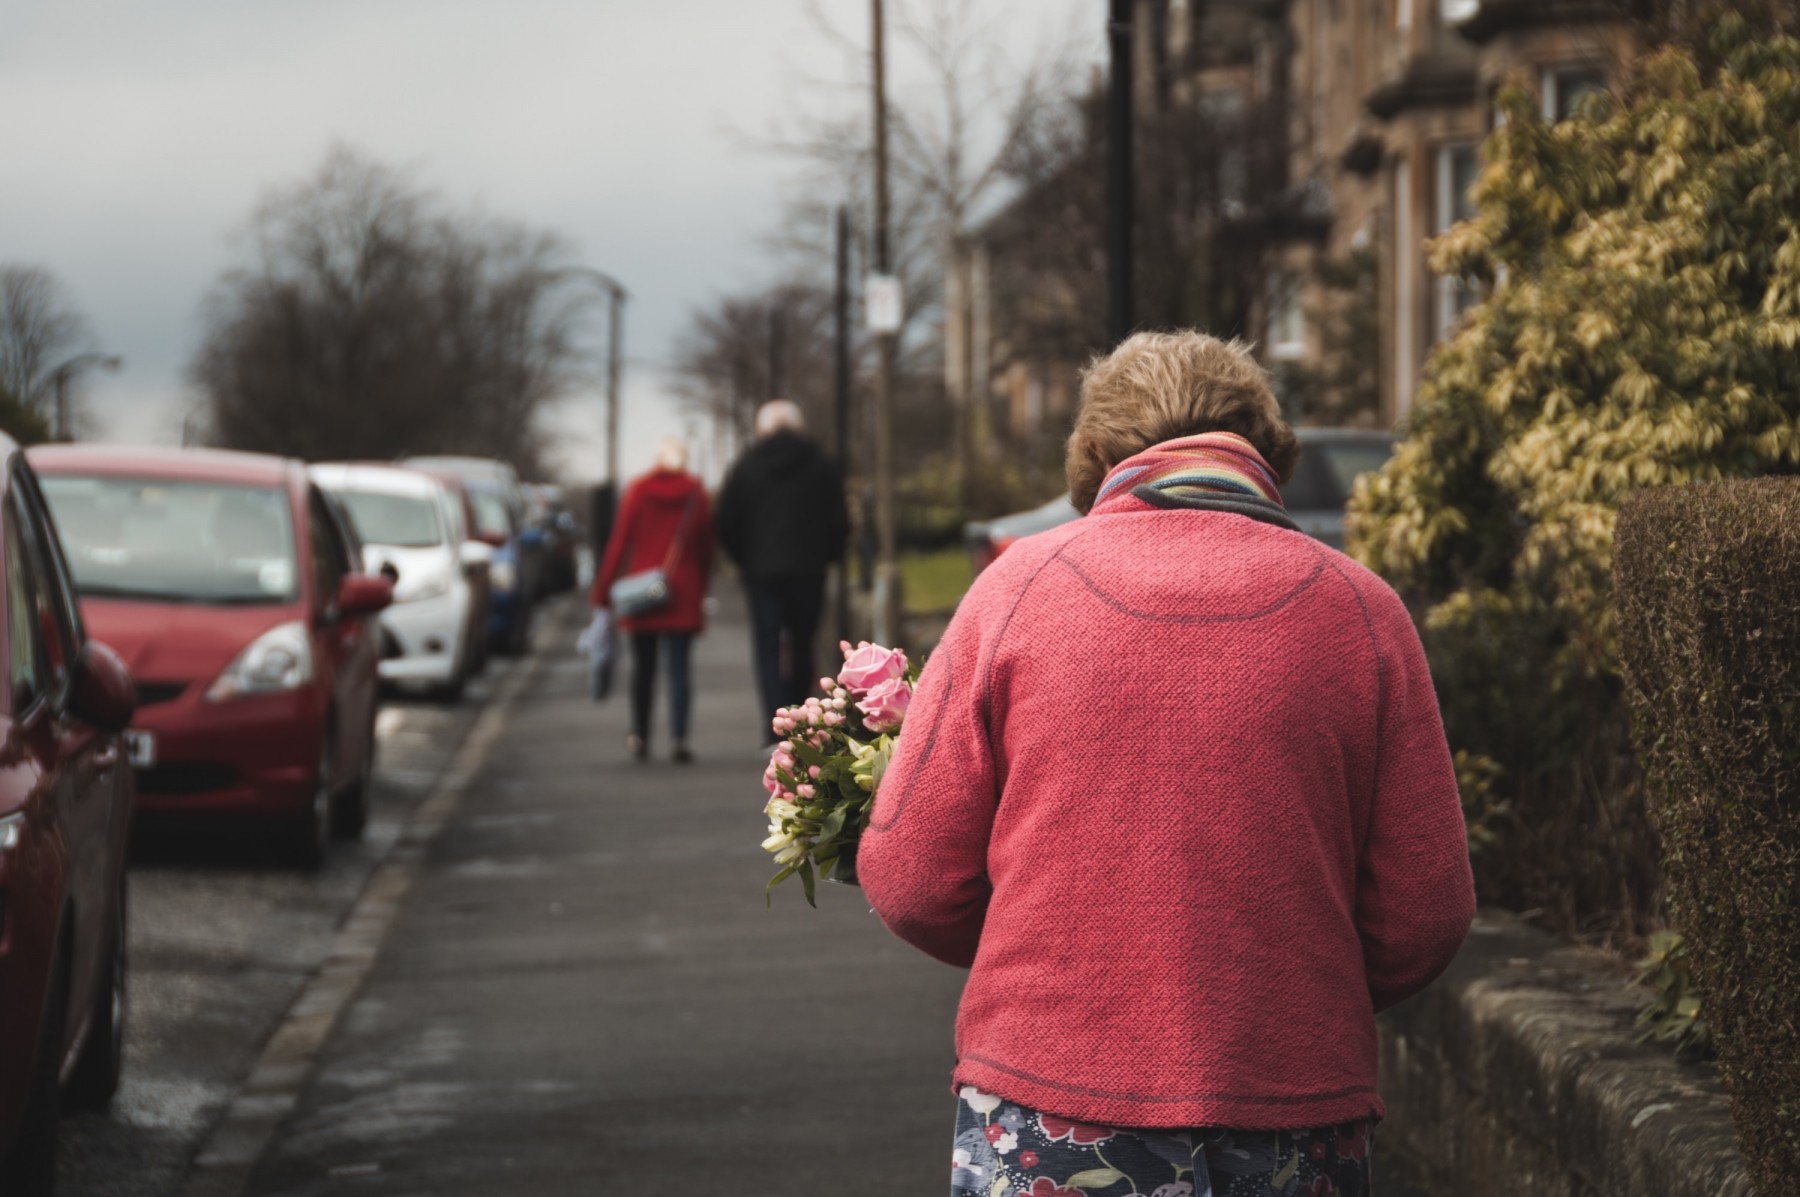 January Can Be the Loneliest Month for Older People